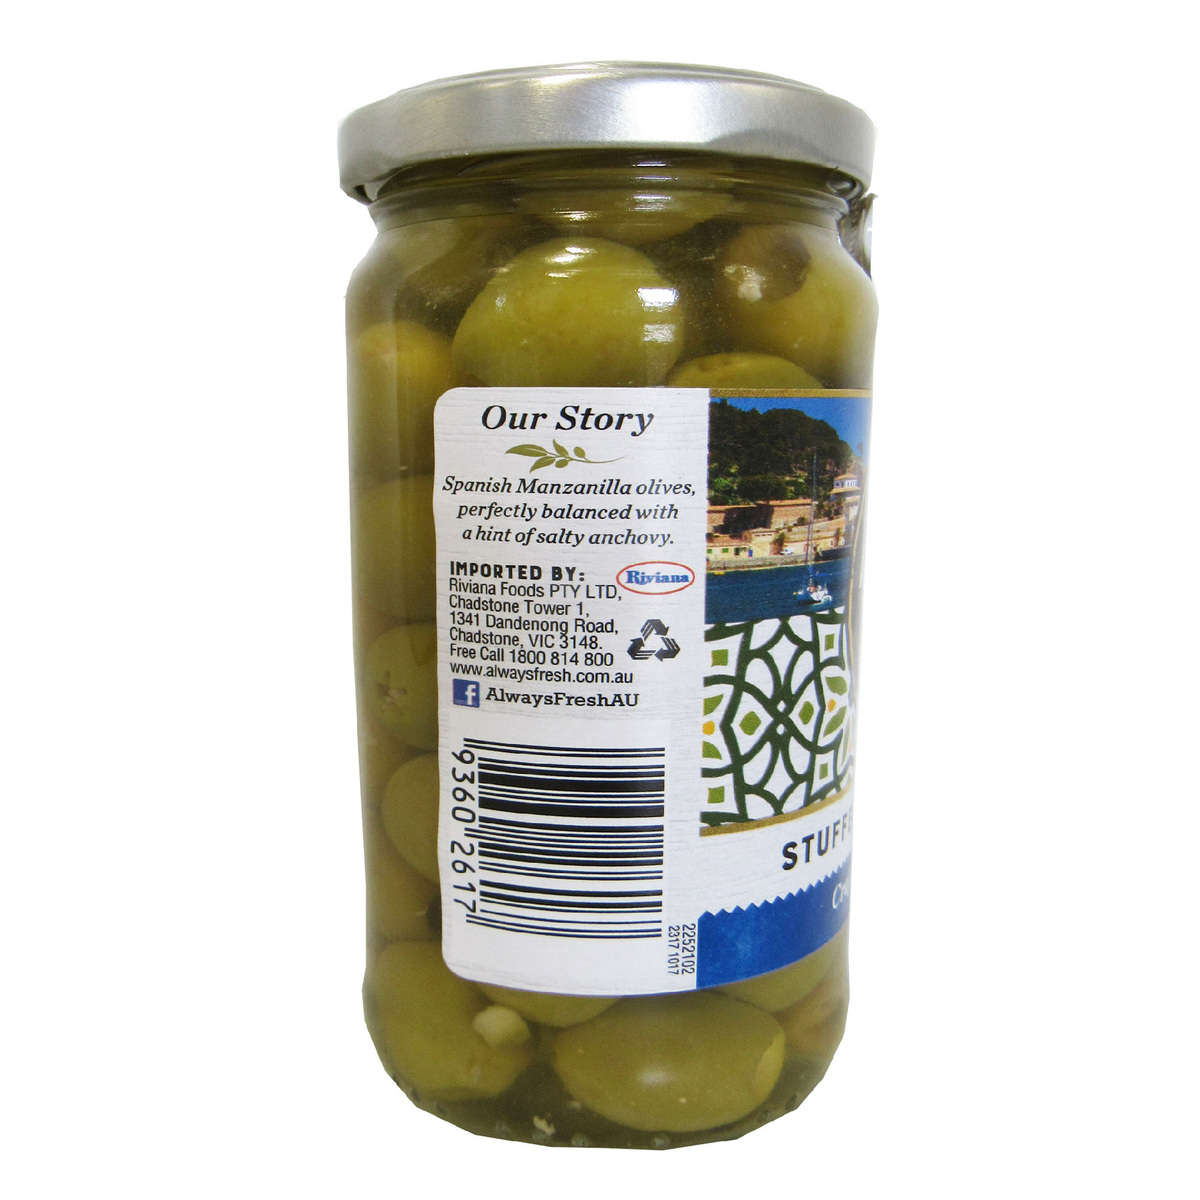 Always Fresh Anchovy Stuffed Olives 235 g